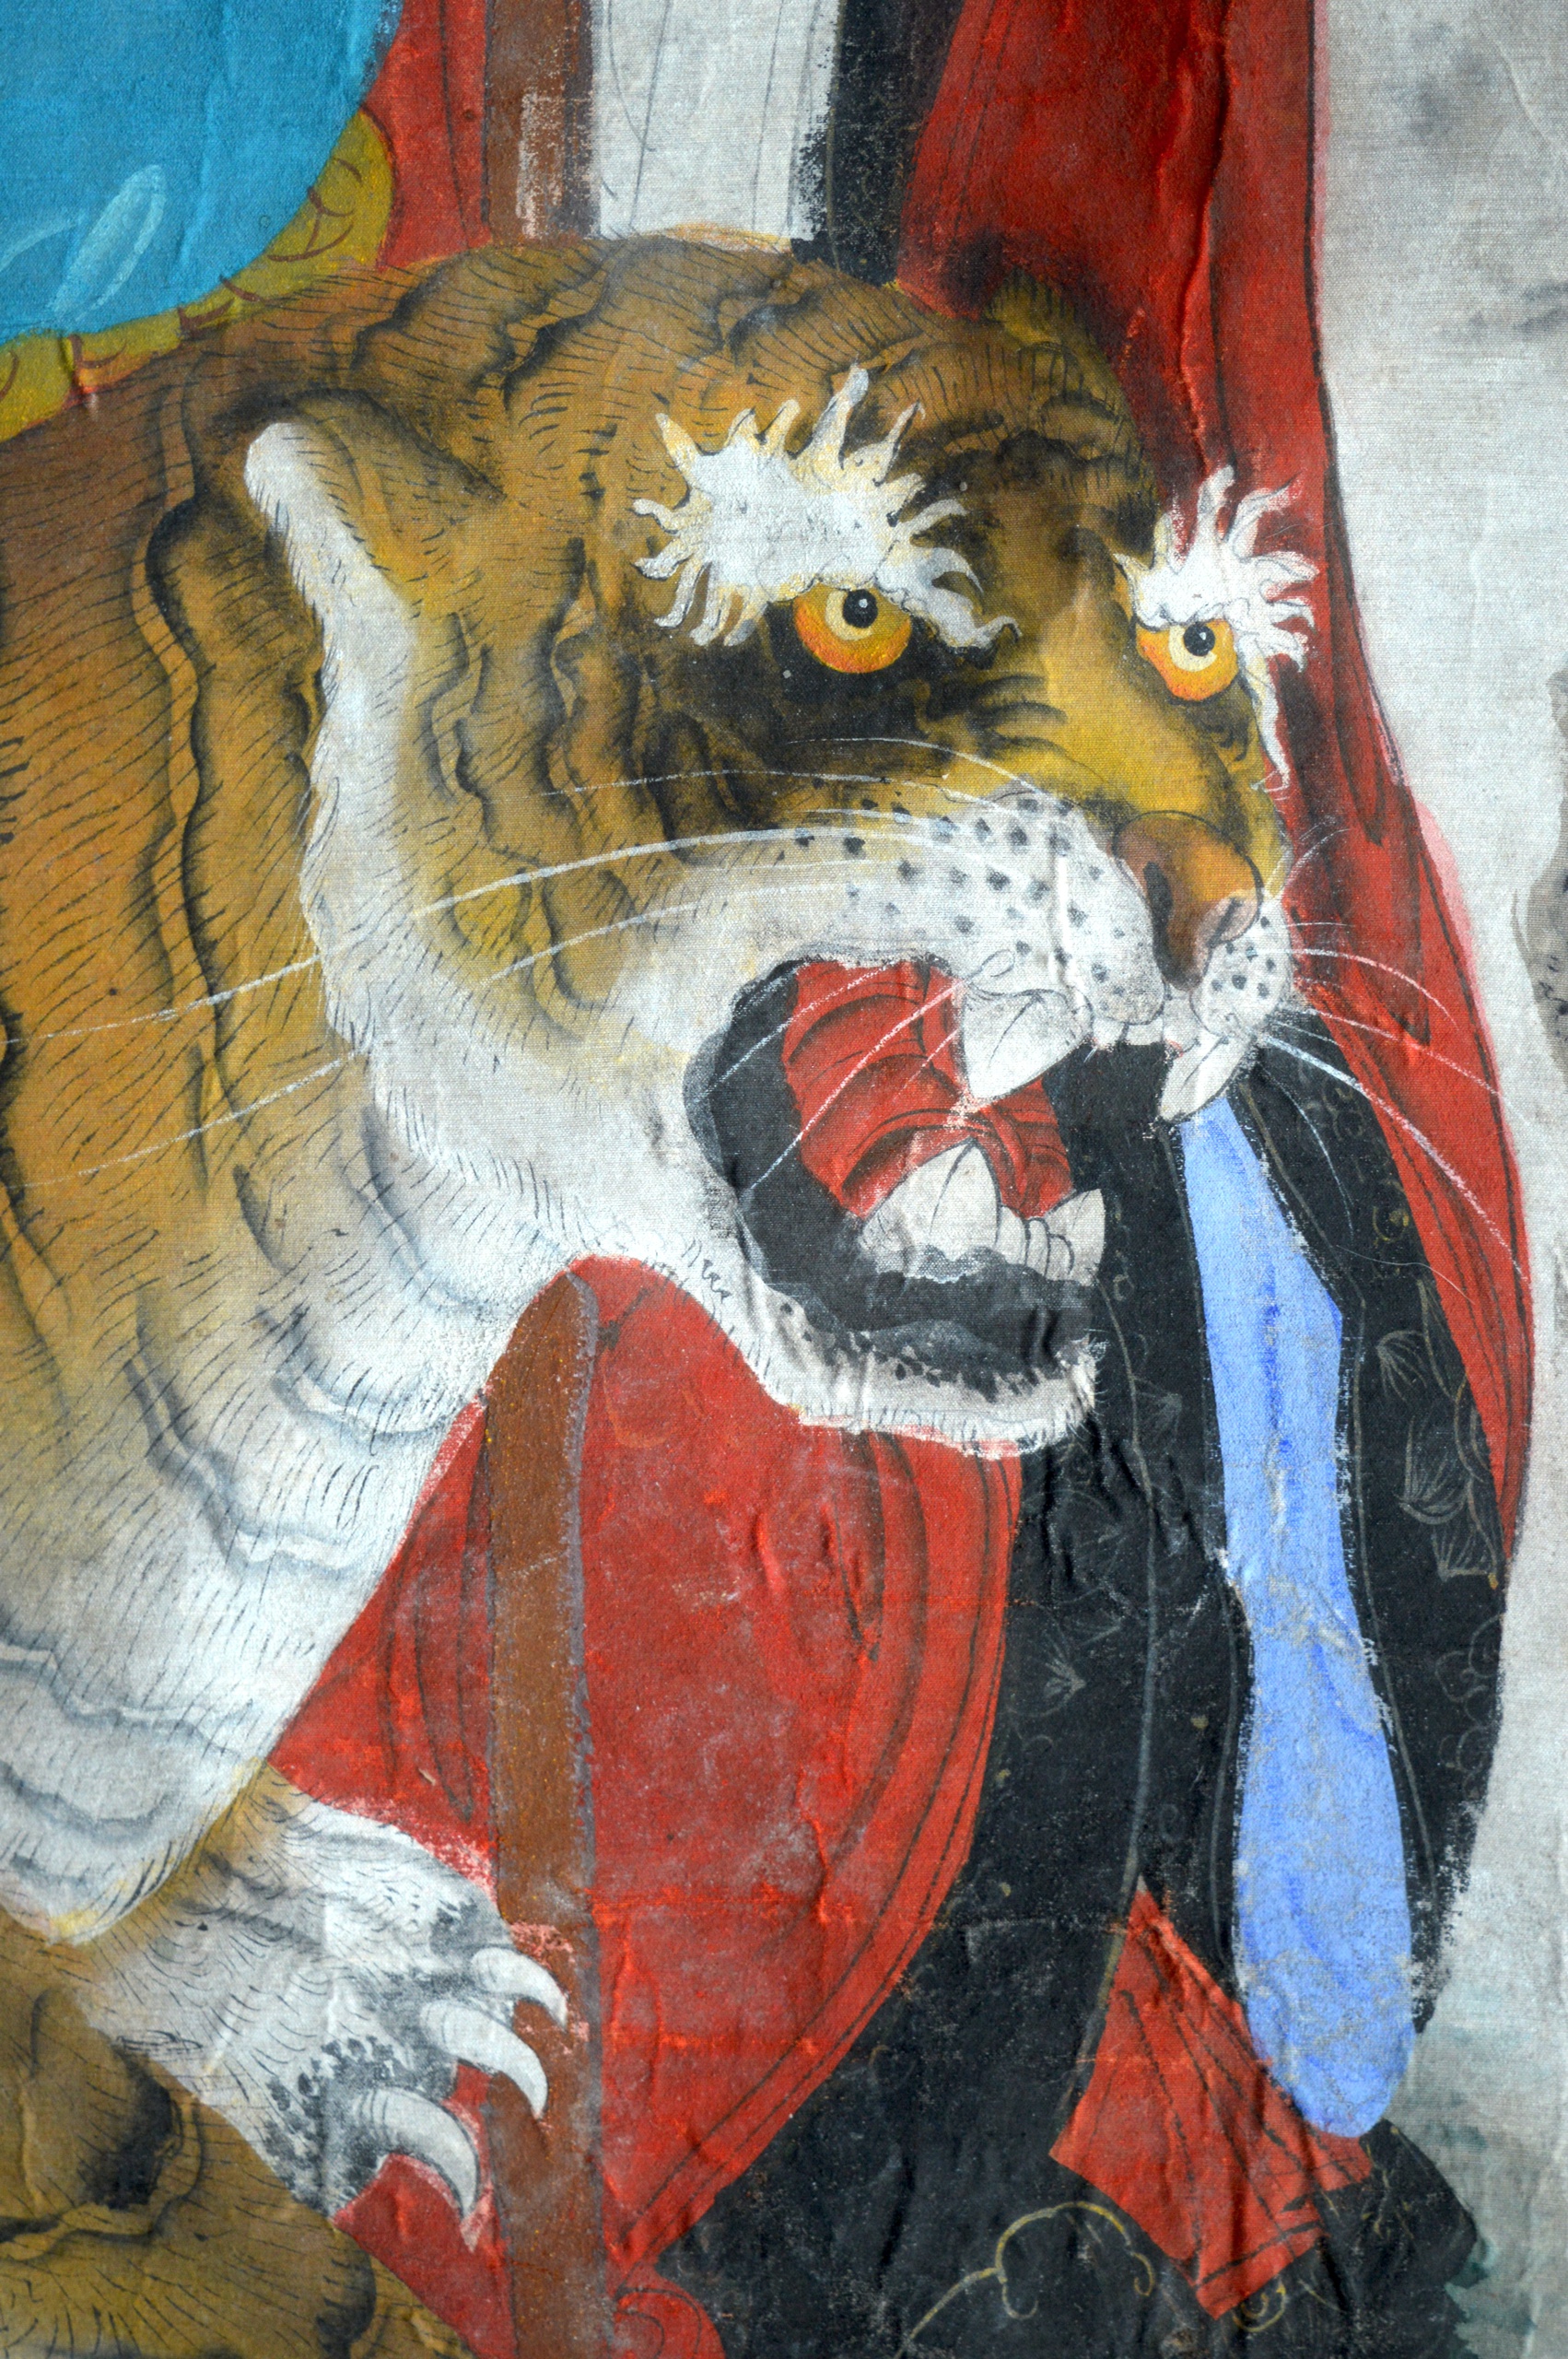 CHINESE SCHOOL (19TH CENTURY) SCHOLAR AND A TIGER within a landscape, Oil on canvas, bearing - Image 3 of 4